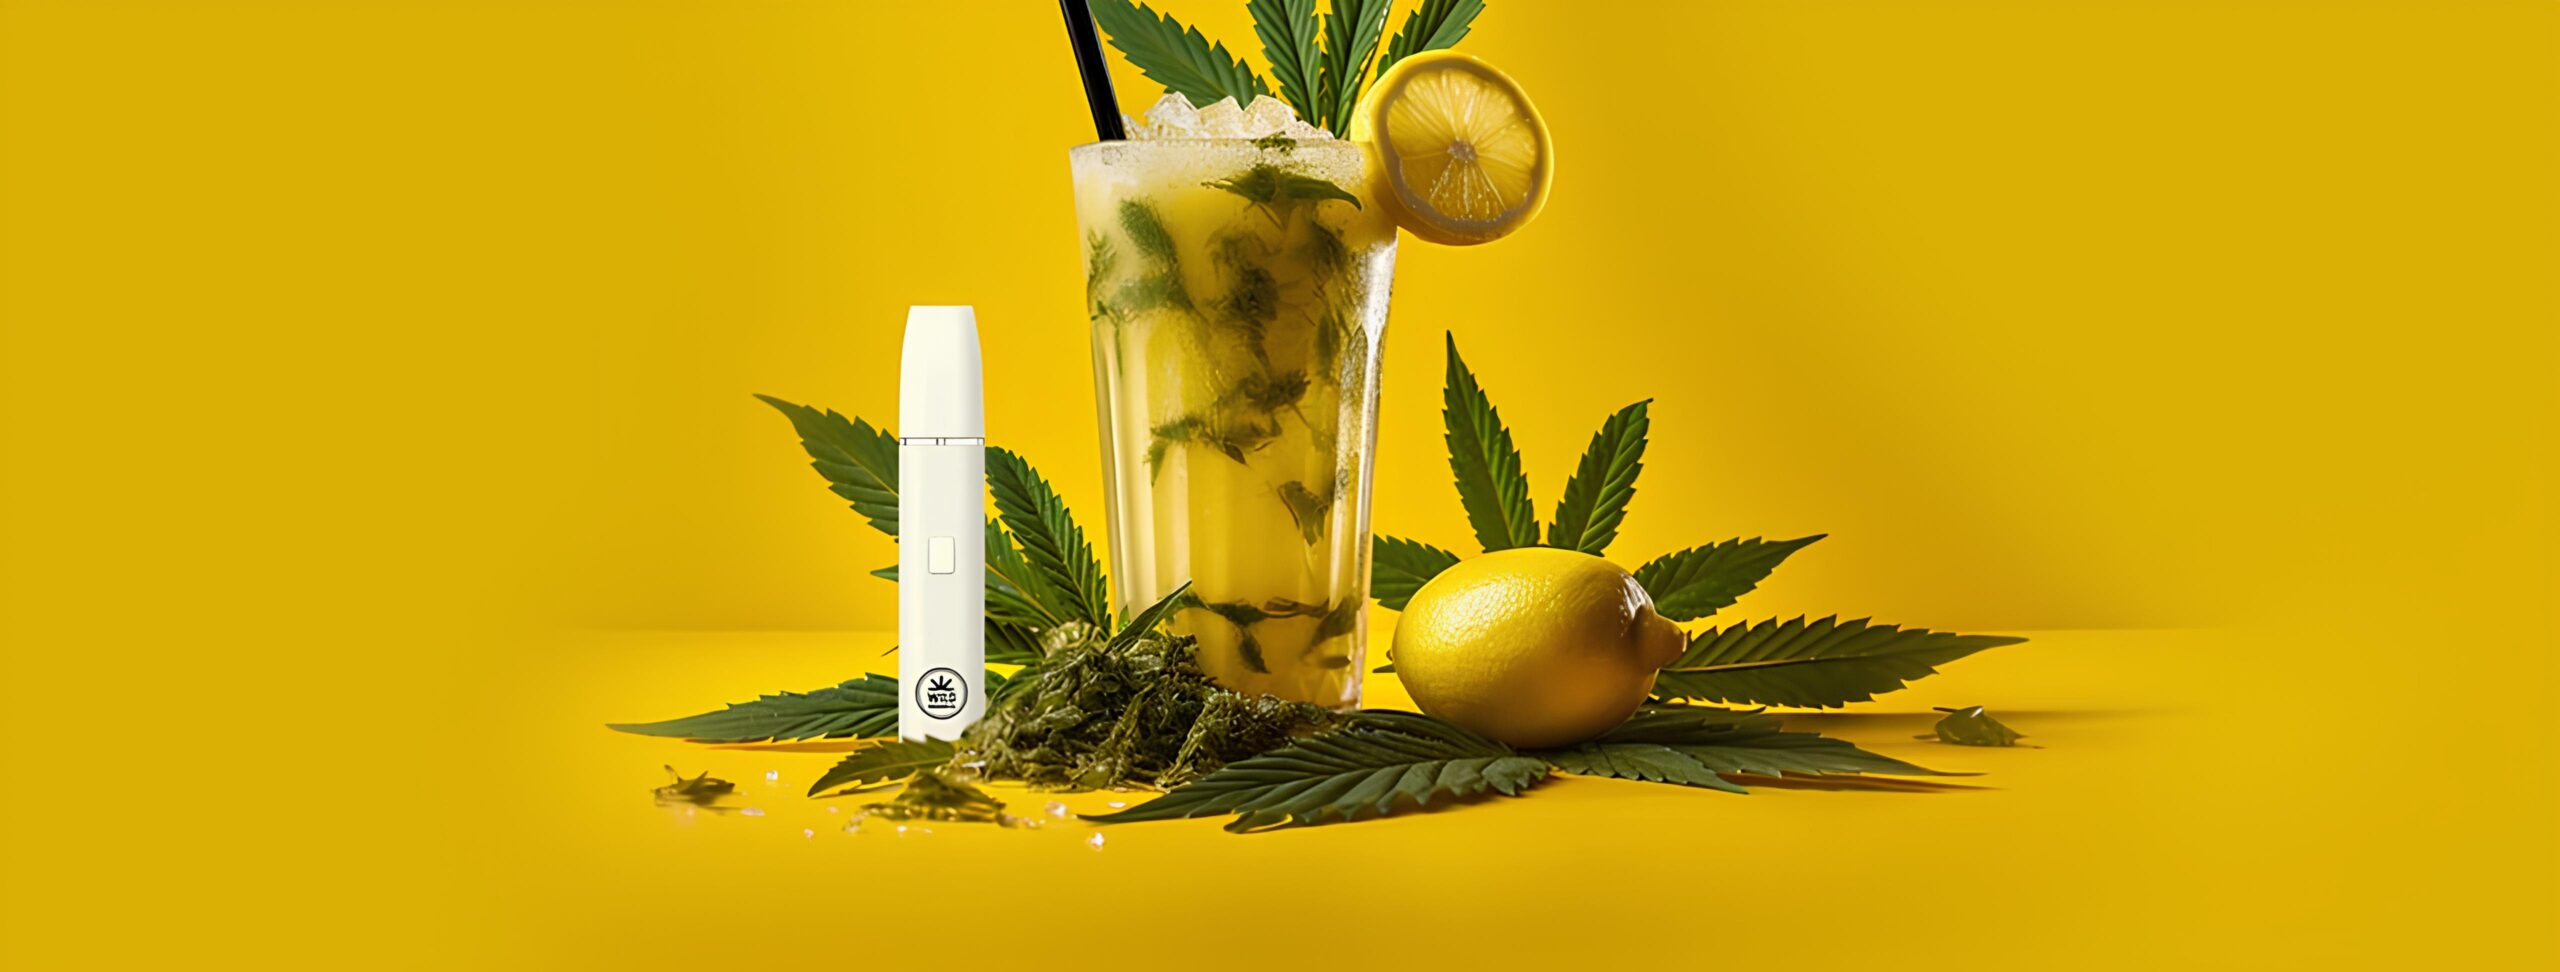 A cannabis-themed still life with a lemon drink, vape pen, and cannabis leaves on a yellow background.